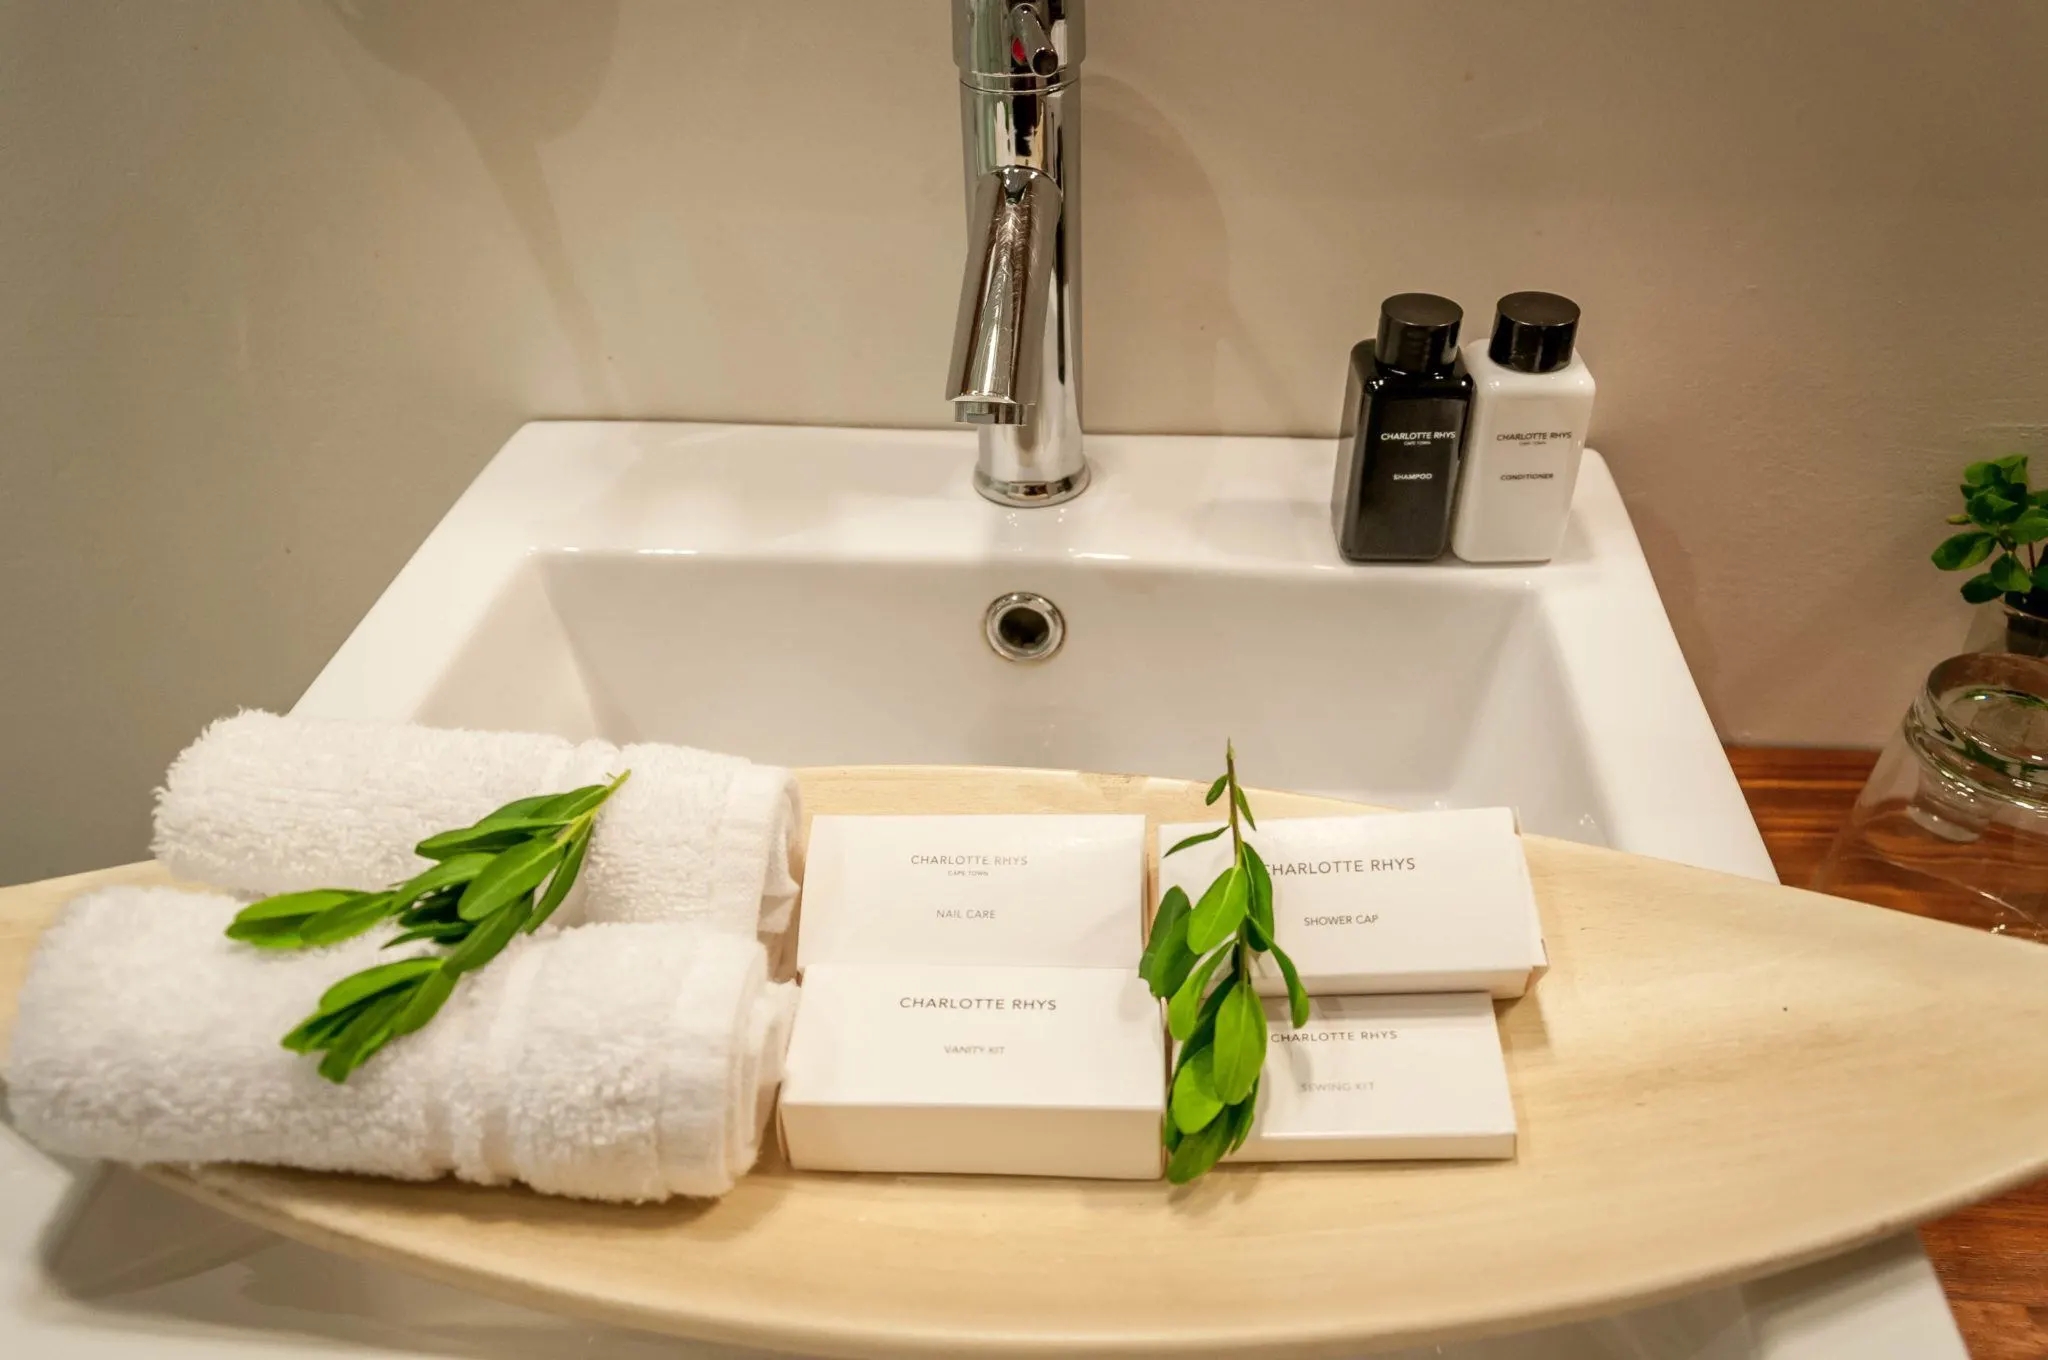 Bathroom amenities from Charlotte Rhys Cape Town.